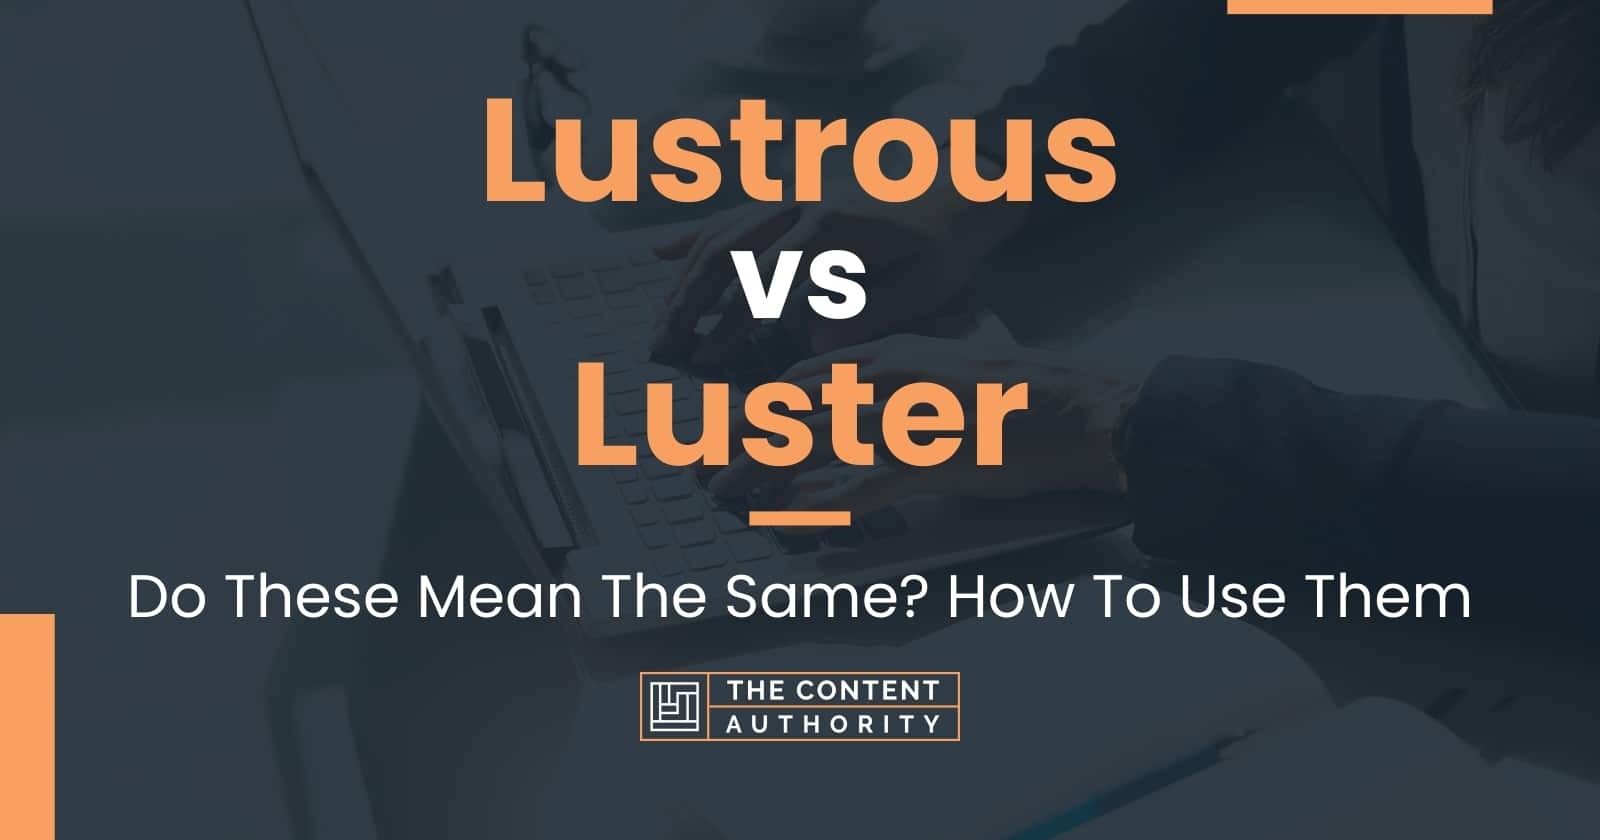 Lustrous vs Luster: Do These Mean The Same? How To Use Them